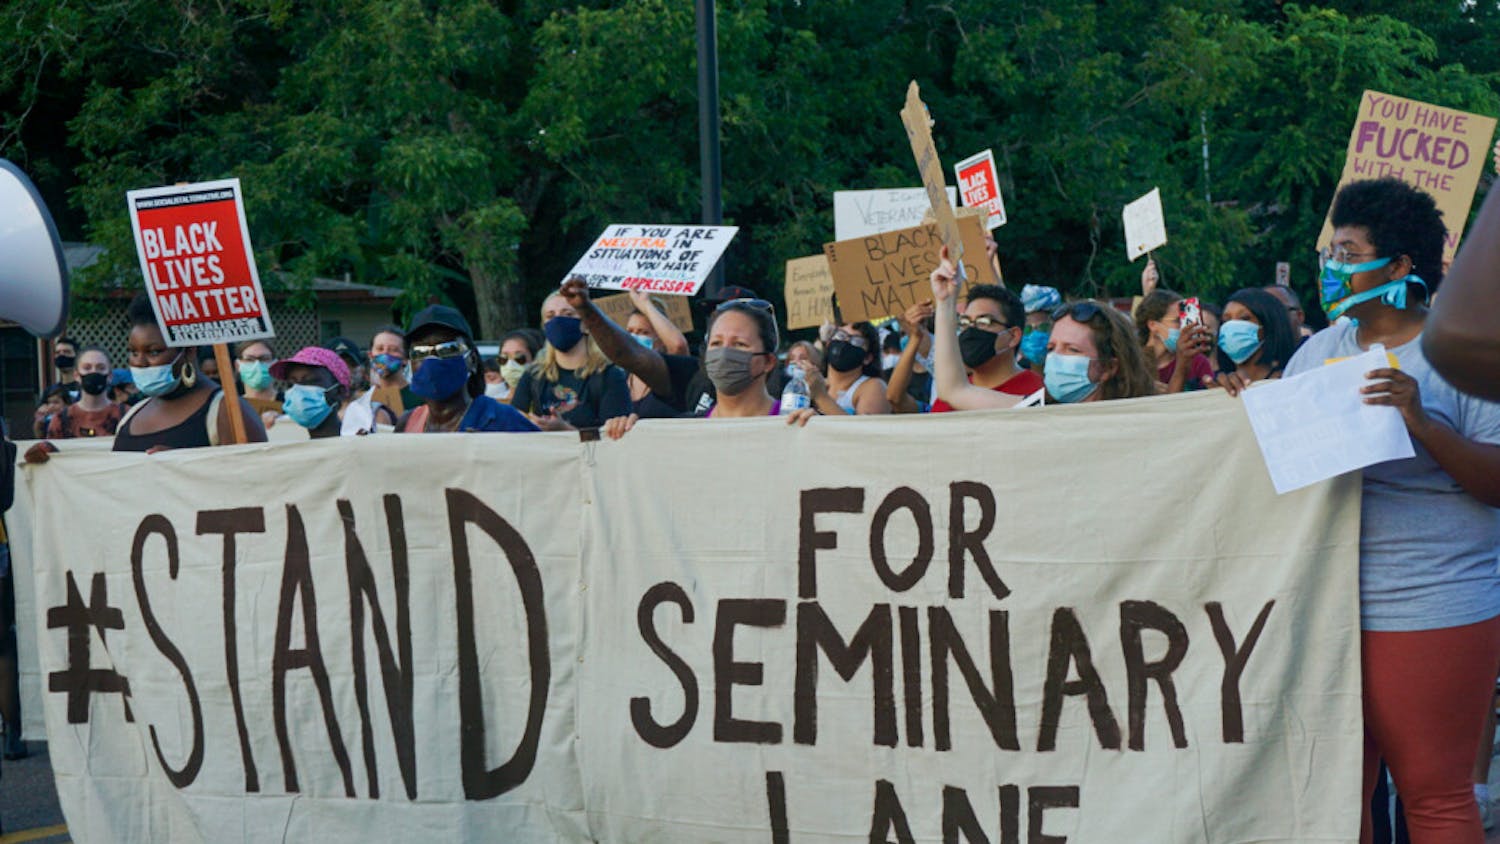 Protesters hold a banner that reads, "#StandForSeminaryLane," demanding that developers refrain from building luxury student apartments on land located in a historically Black community. 